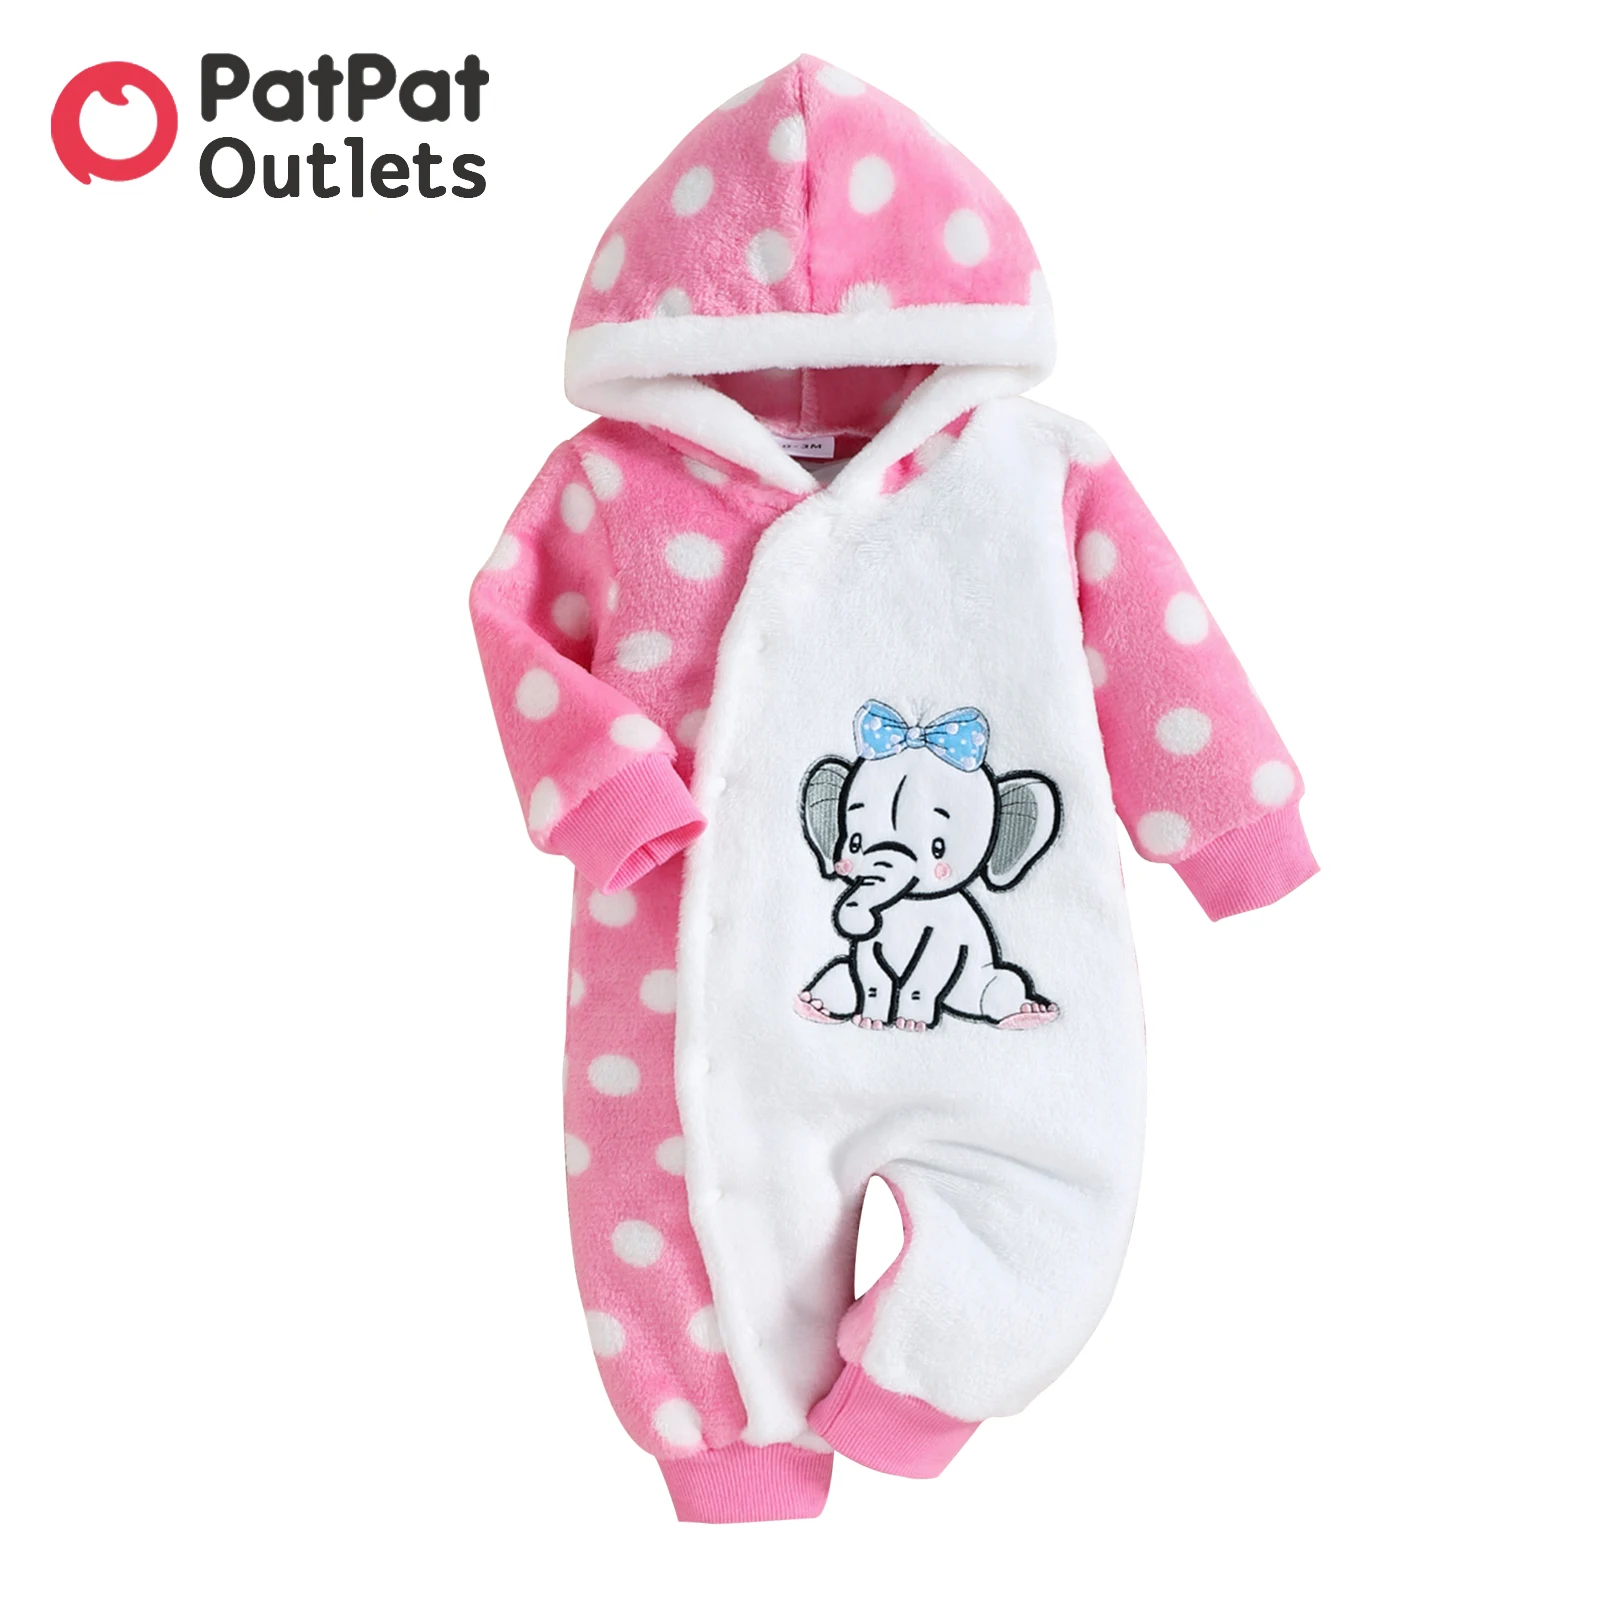 

PatPat Romper Baby Girl Clothes Jumpsuit New Born Overalls Infant Newborn Elephant Embroidered Polka Dots Hooded Thermal Fuzzy